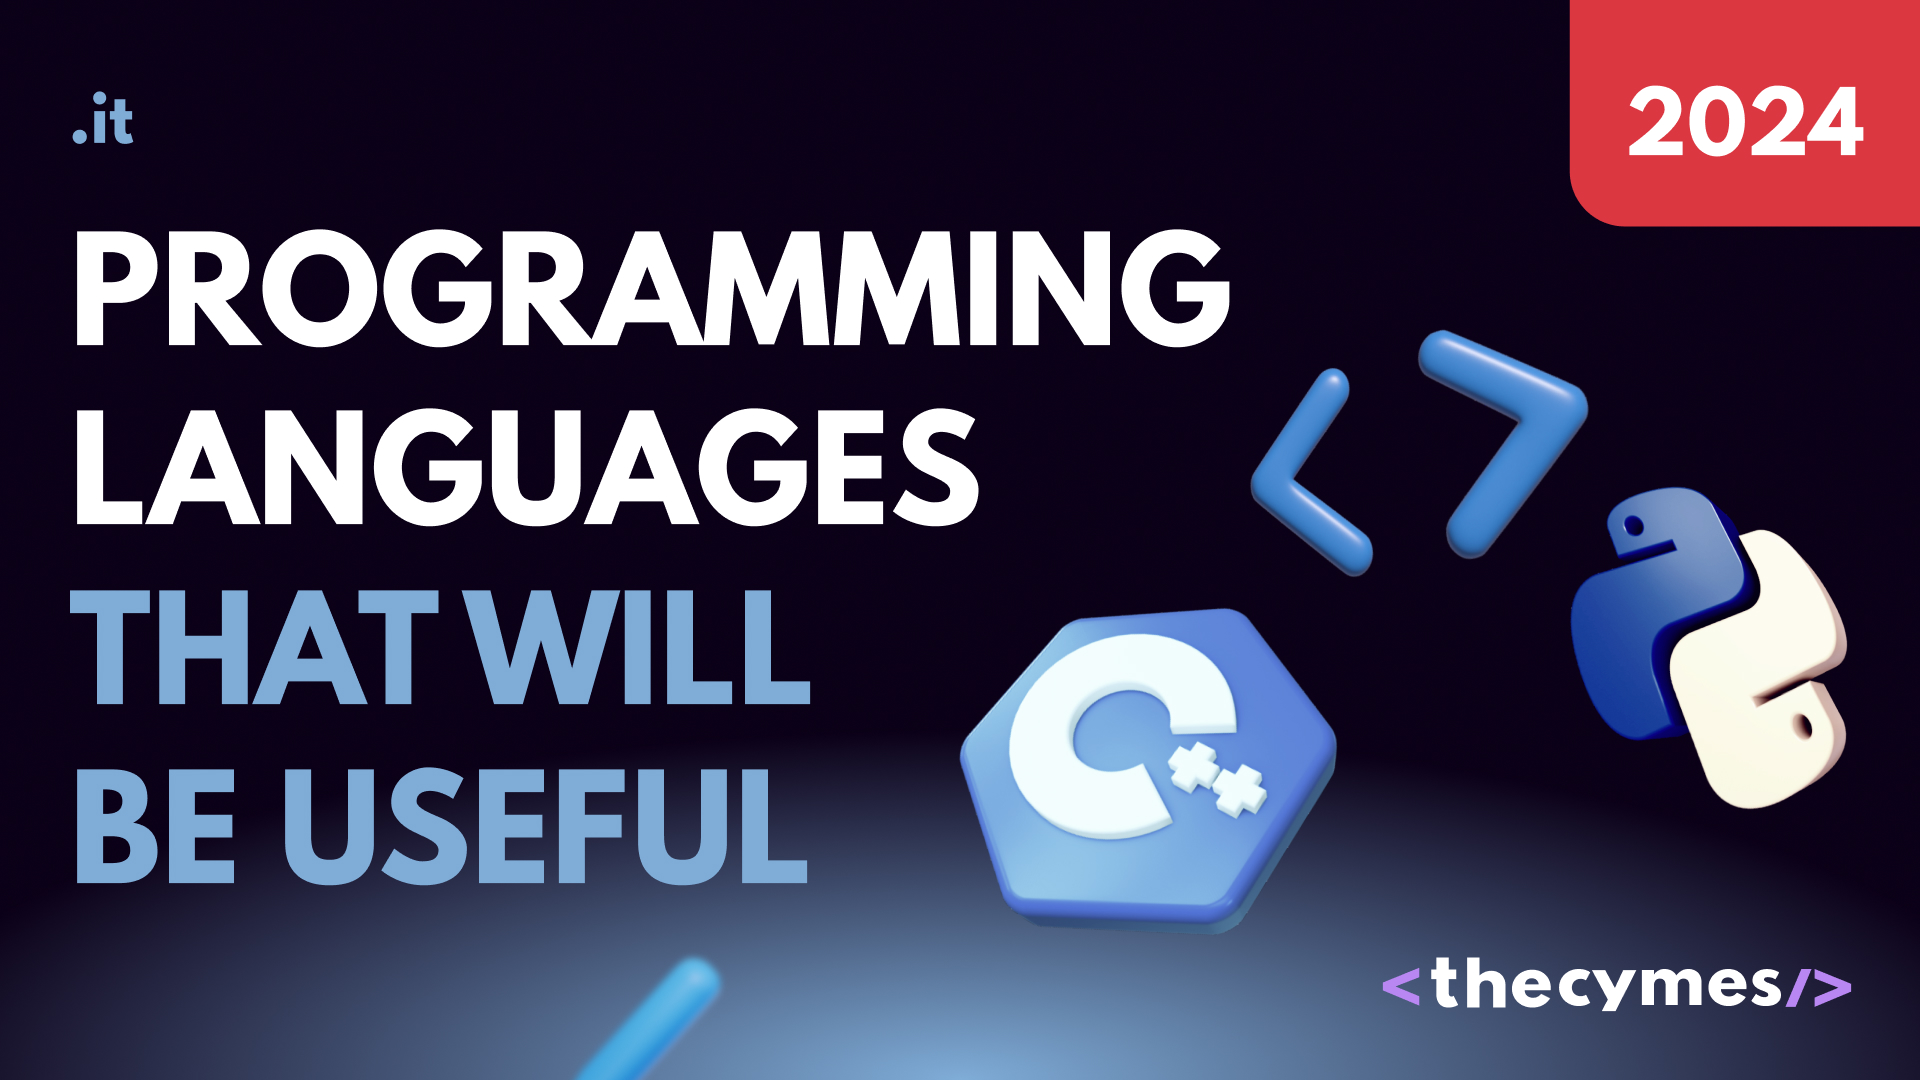 Programming Languages That Will Be Useful in 2024 cover